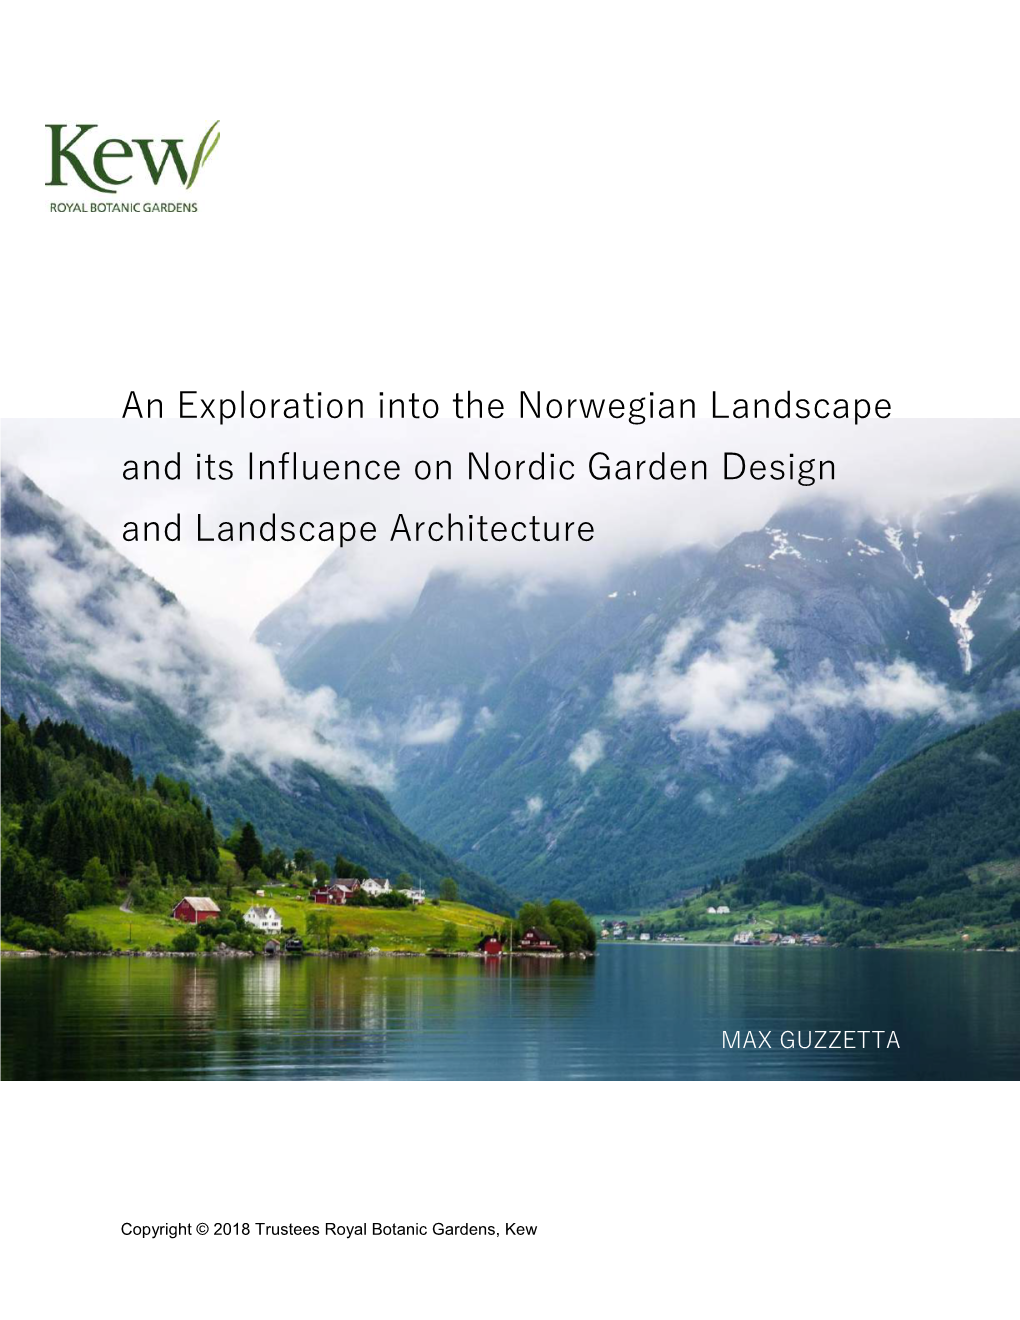 An Exploration Into the Norwegian Landscape and Its Influence on Nordic Garden Design and Landscape Architecture